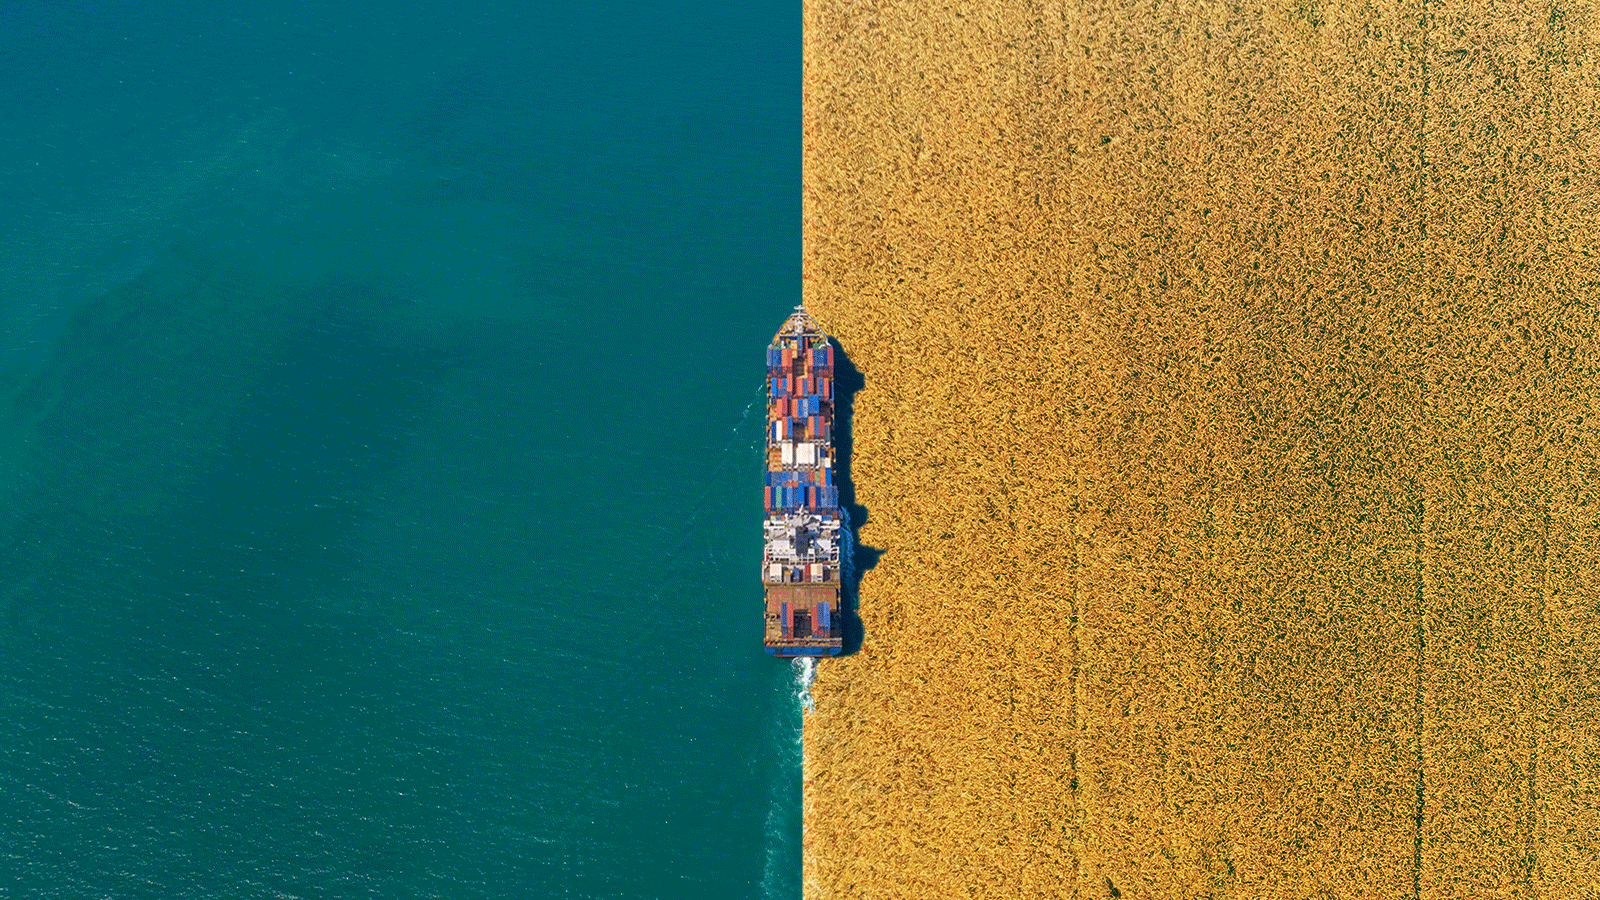 A cargo ship goes through the water and a field.